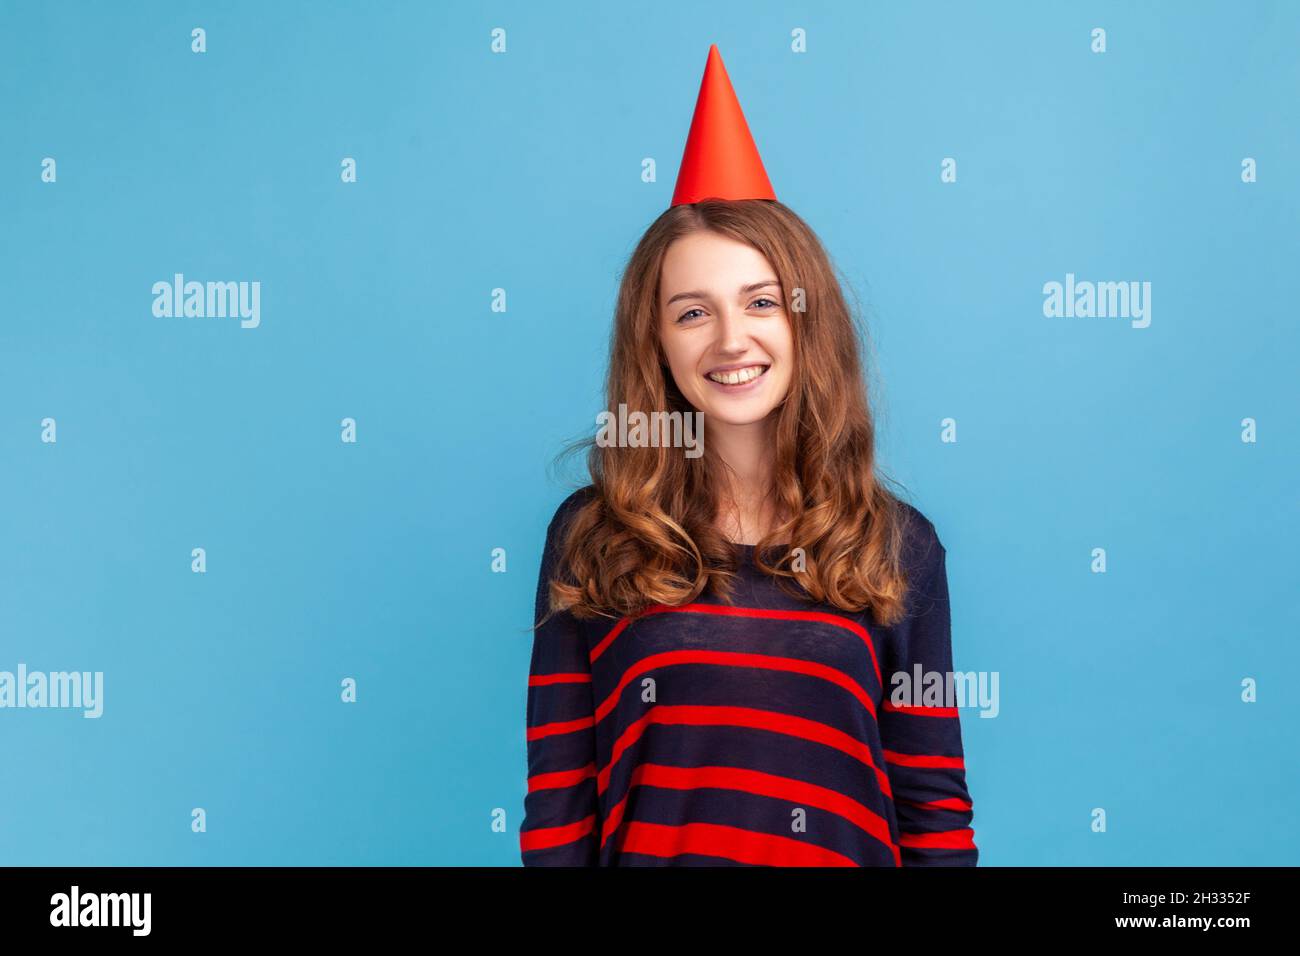 Woman with festive mood wearing striped casual style sweater, standing happy facial expression, celebrating her birthday with party cone on her head. Indoor studio shot isolated on blue background. Stock Photo